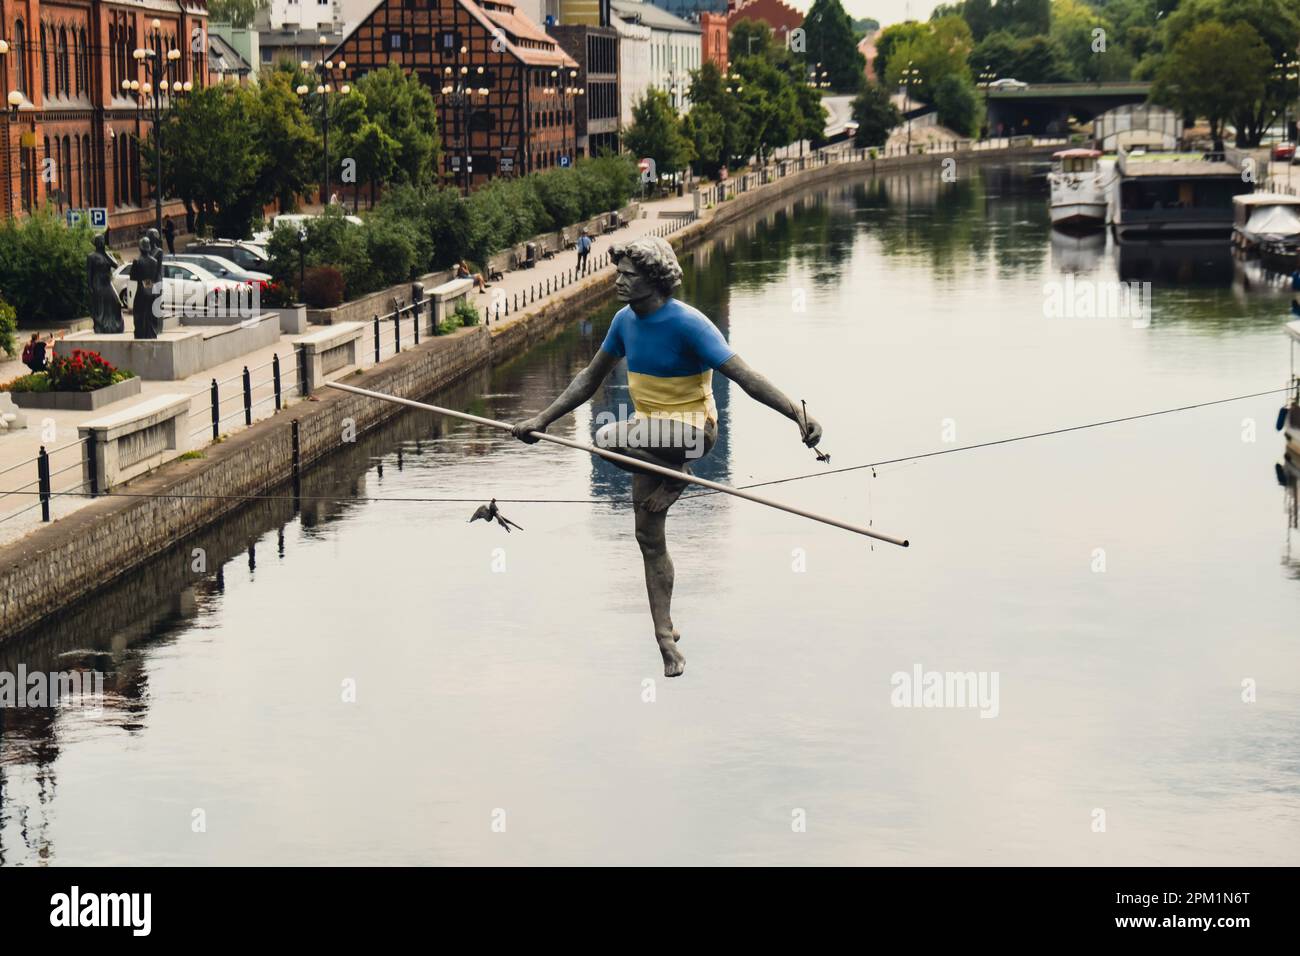 Bydgoszcz, Poland - August 2022 Brda river in Bydgoszcz, Man crossing a river sculpture , of a man balancing on a wire, old granary building, Kuyavian-Pomerania. Old town with reflection in Brda River. Old town view with famous statue in Ukrainian flag on the rope. Stock Photo